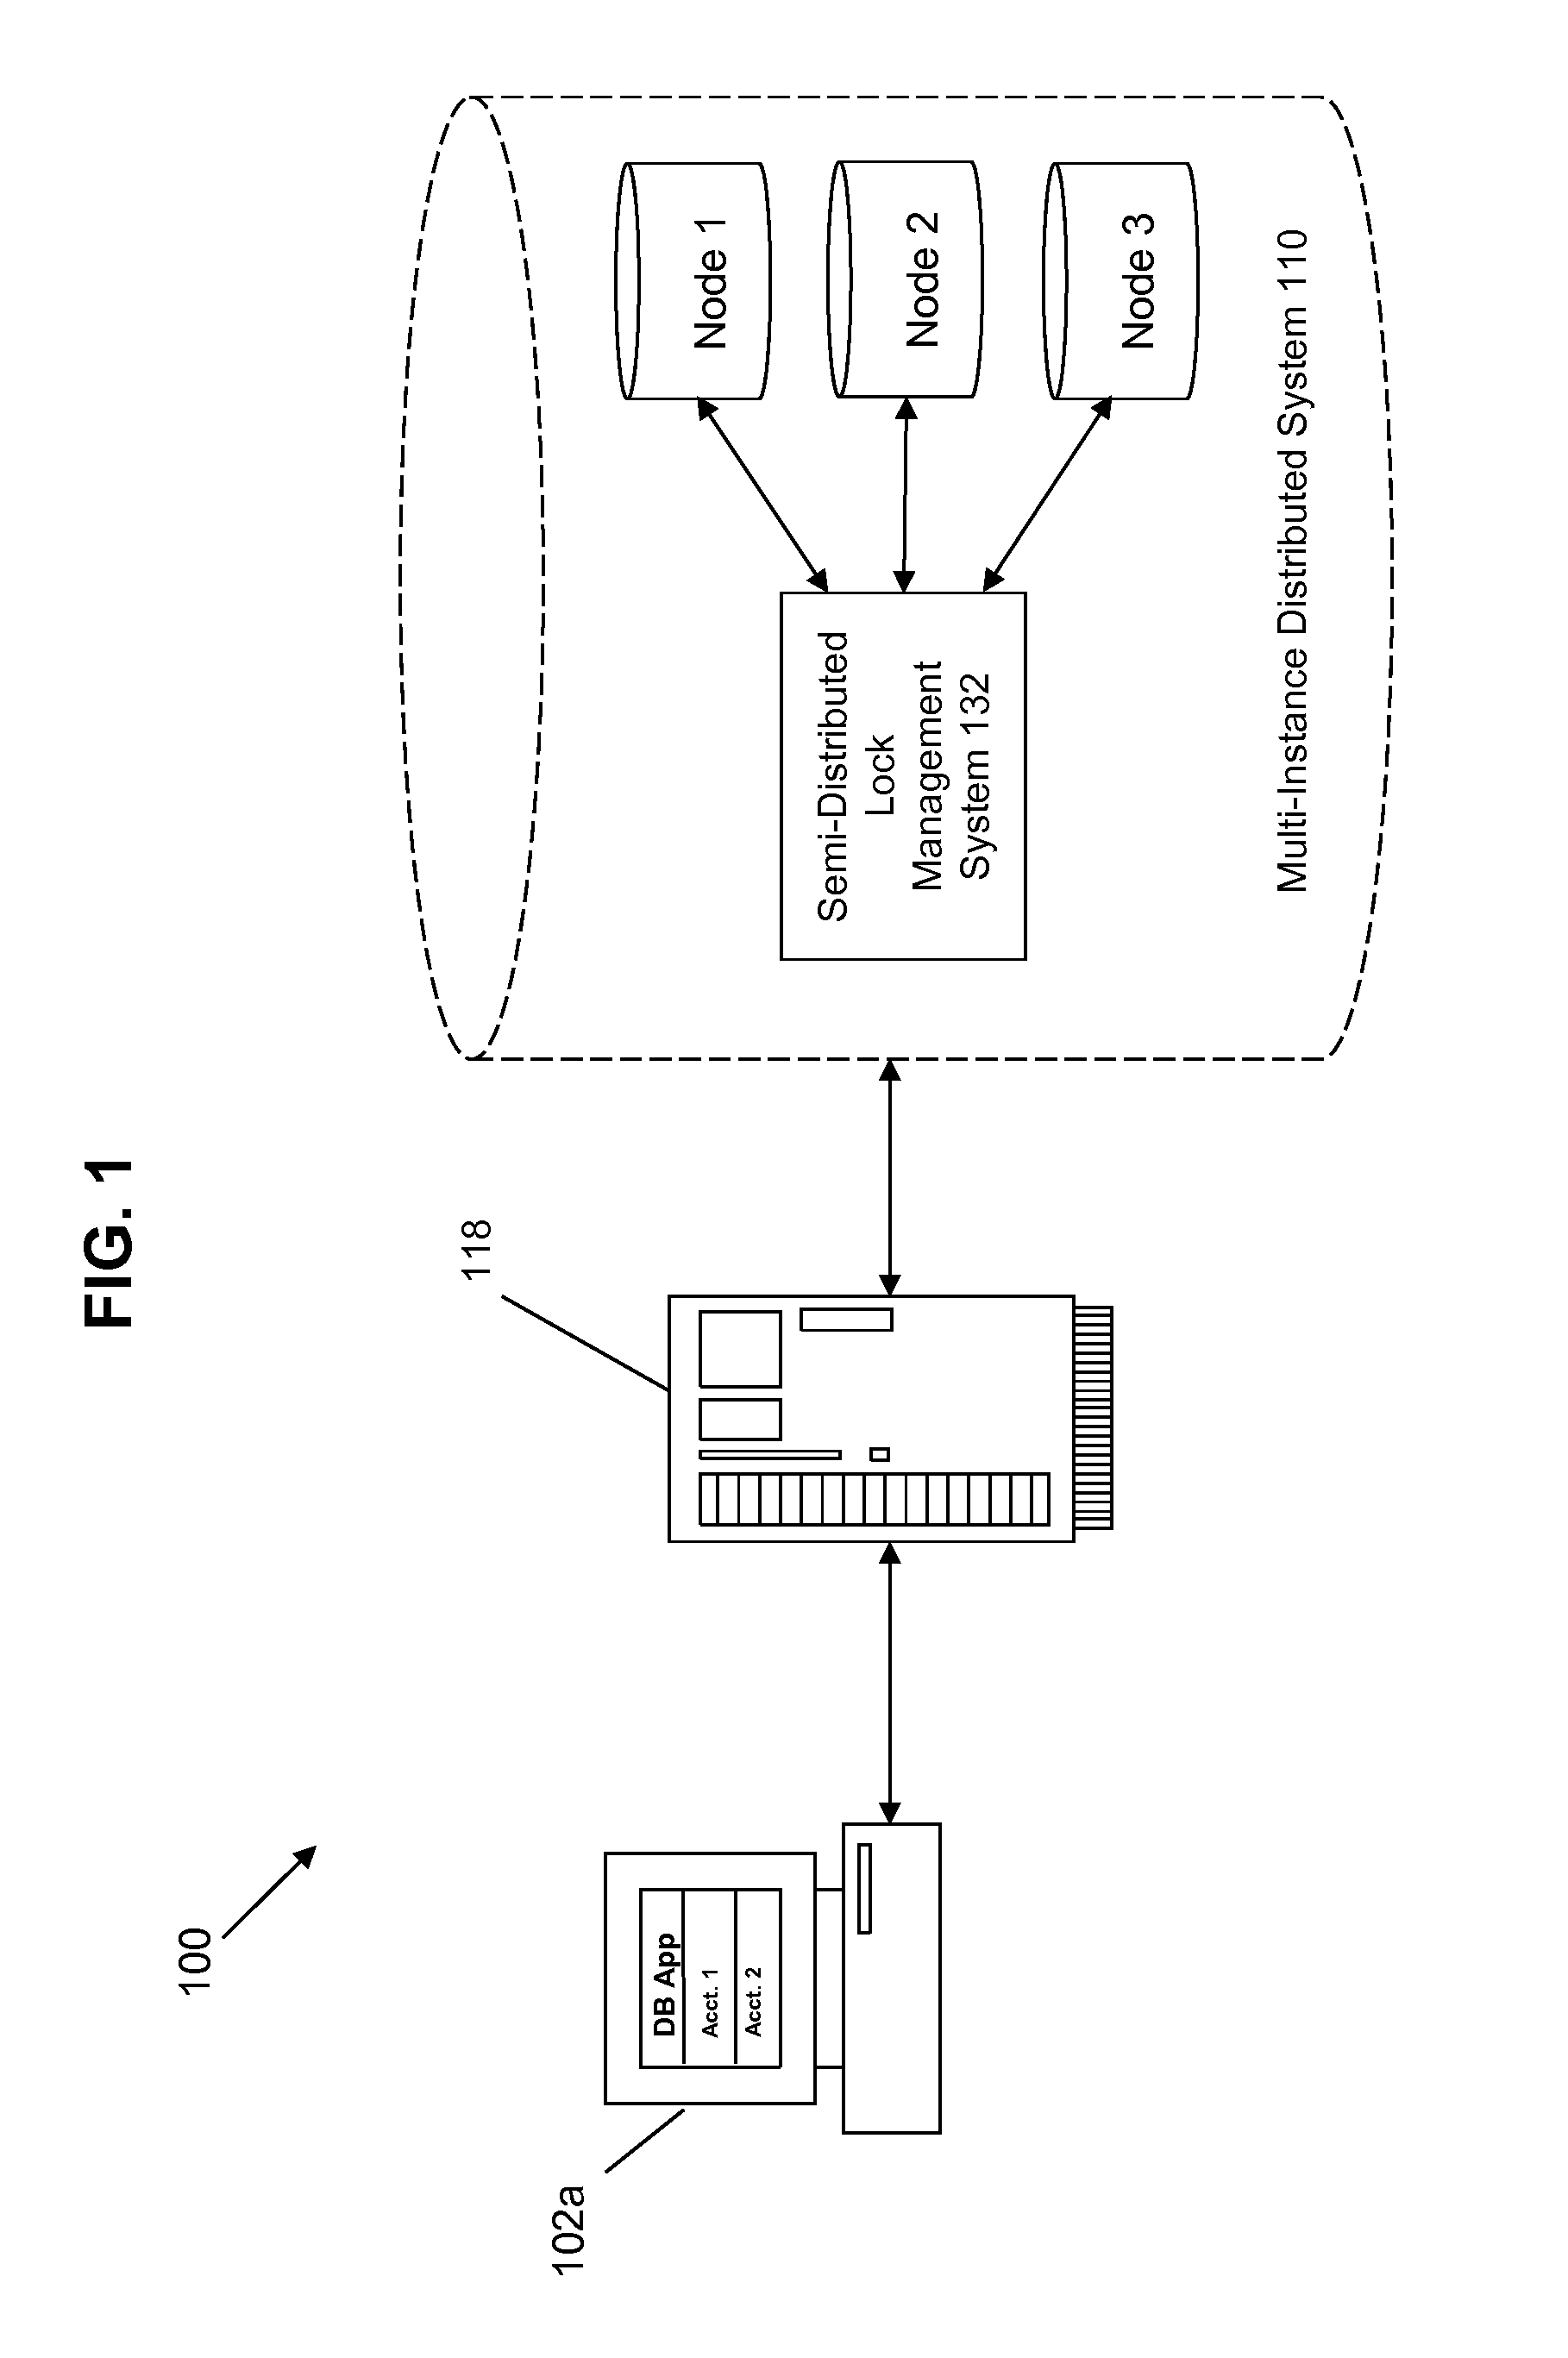 Methods and apparatus for implementing semi-distributed lock management